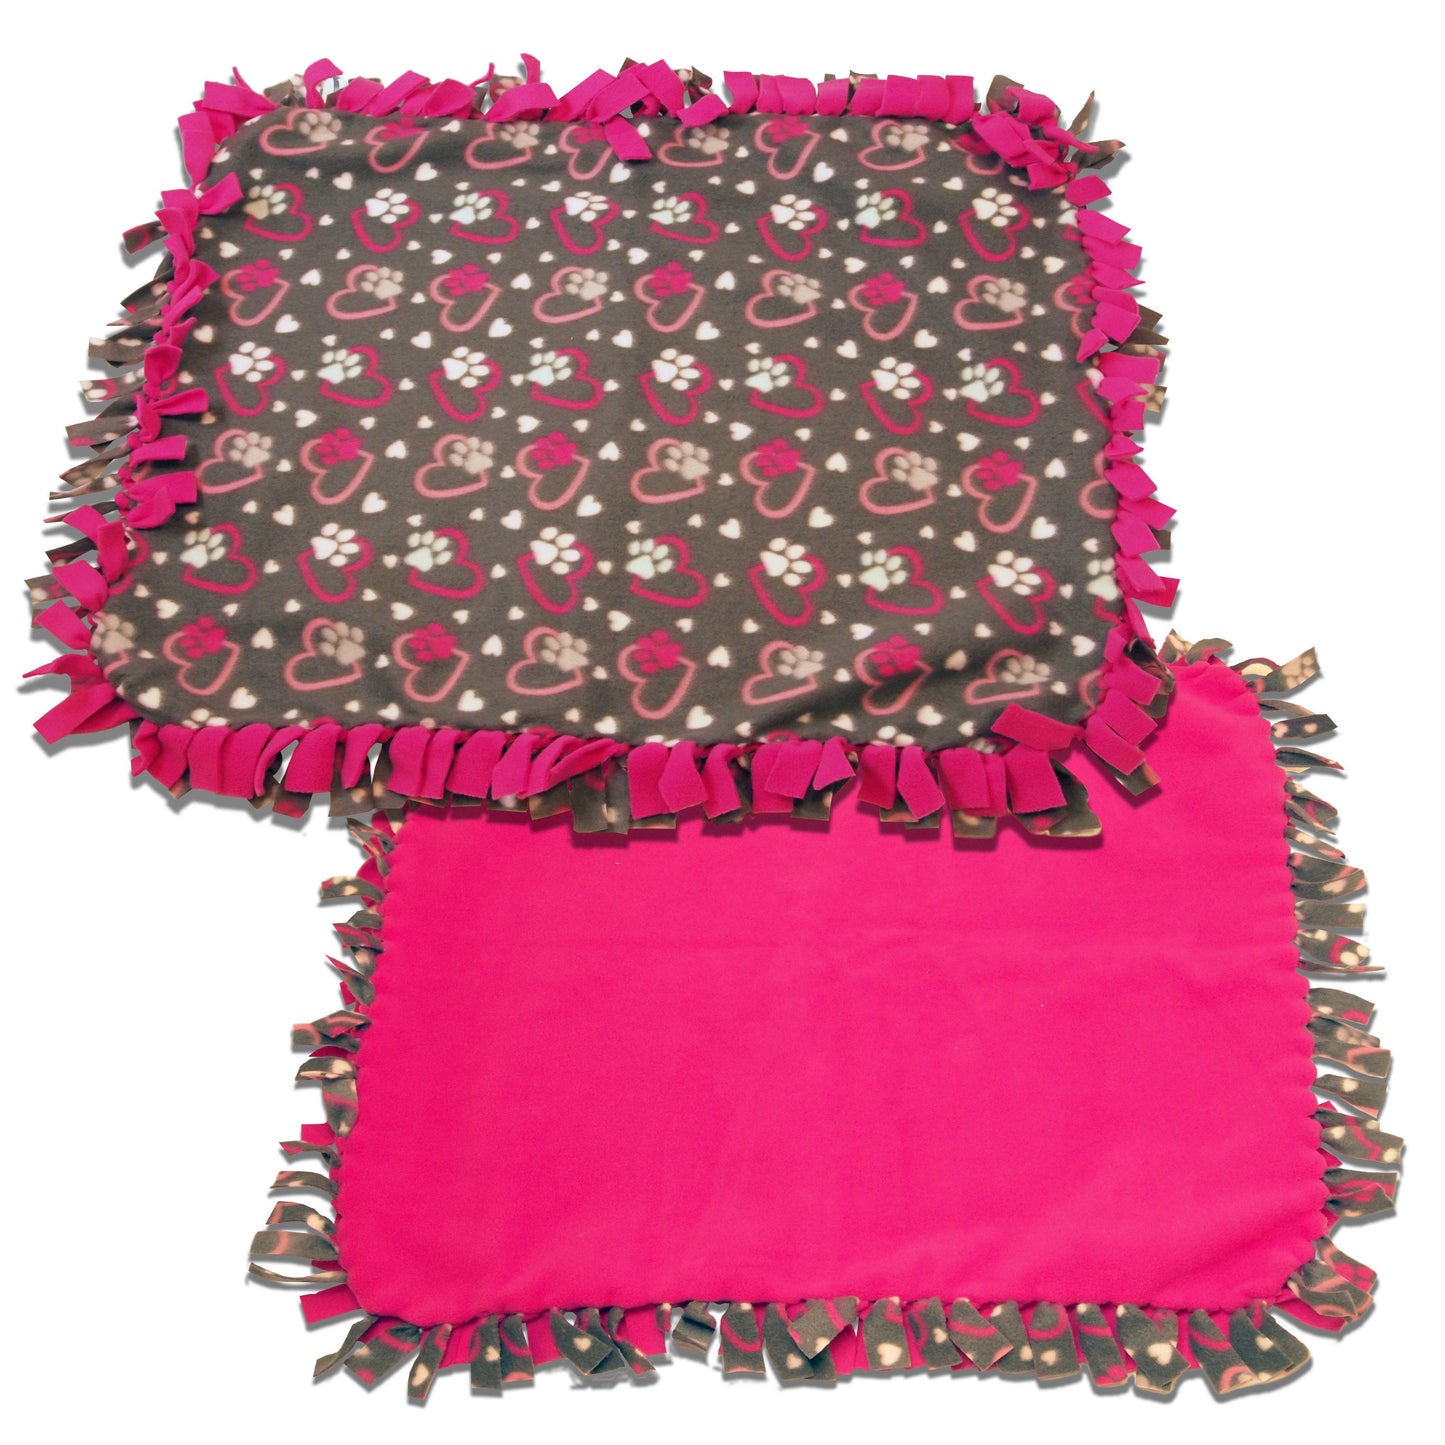 Reversible, 2-Sided Fleece Stroller/Crate Dog Blanket : Gray + Pink, Hearts and Paws w. Hot Pink back  27" x 29" - LEAGUE OF CRAFTY CANINES